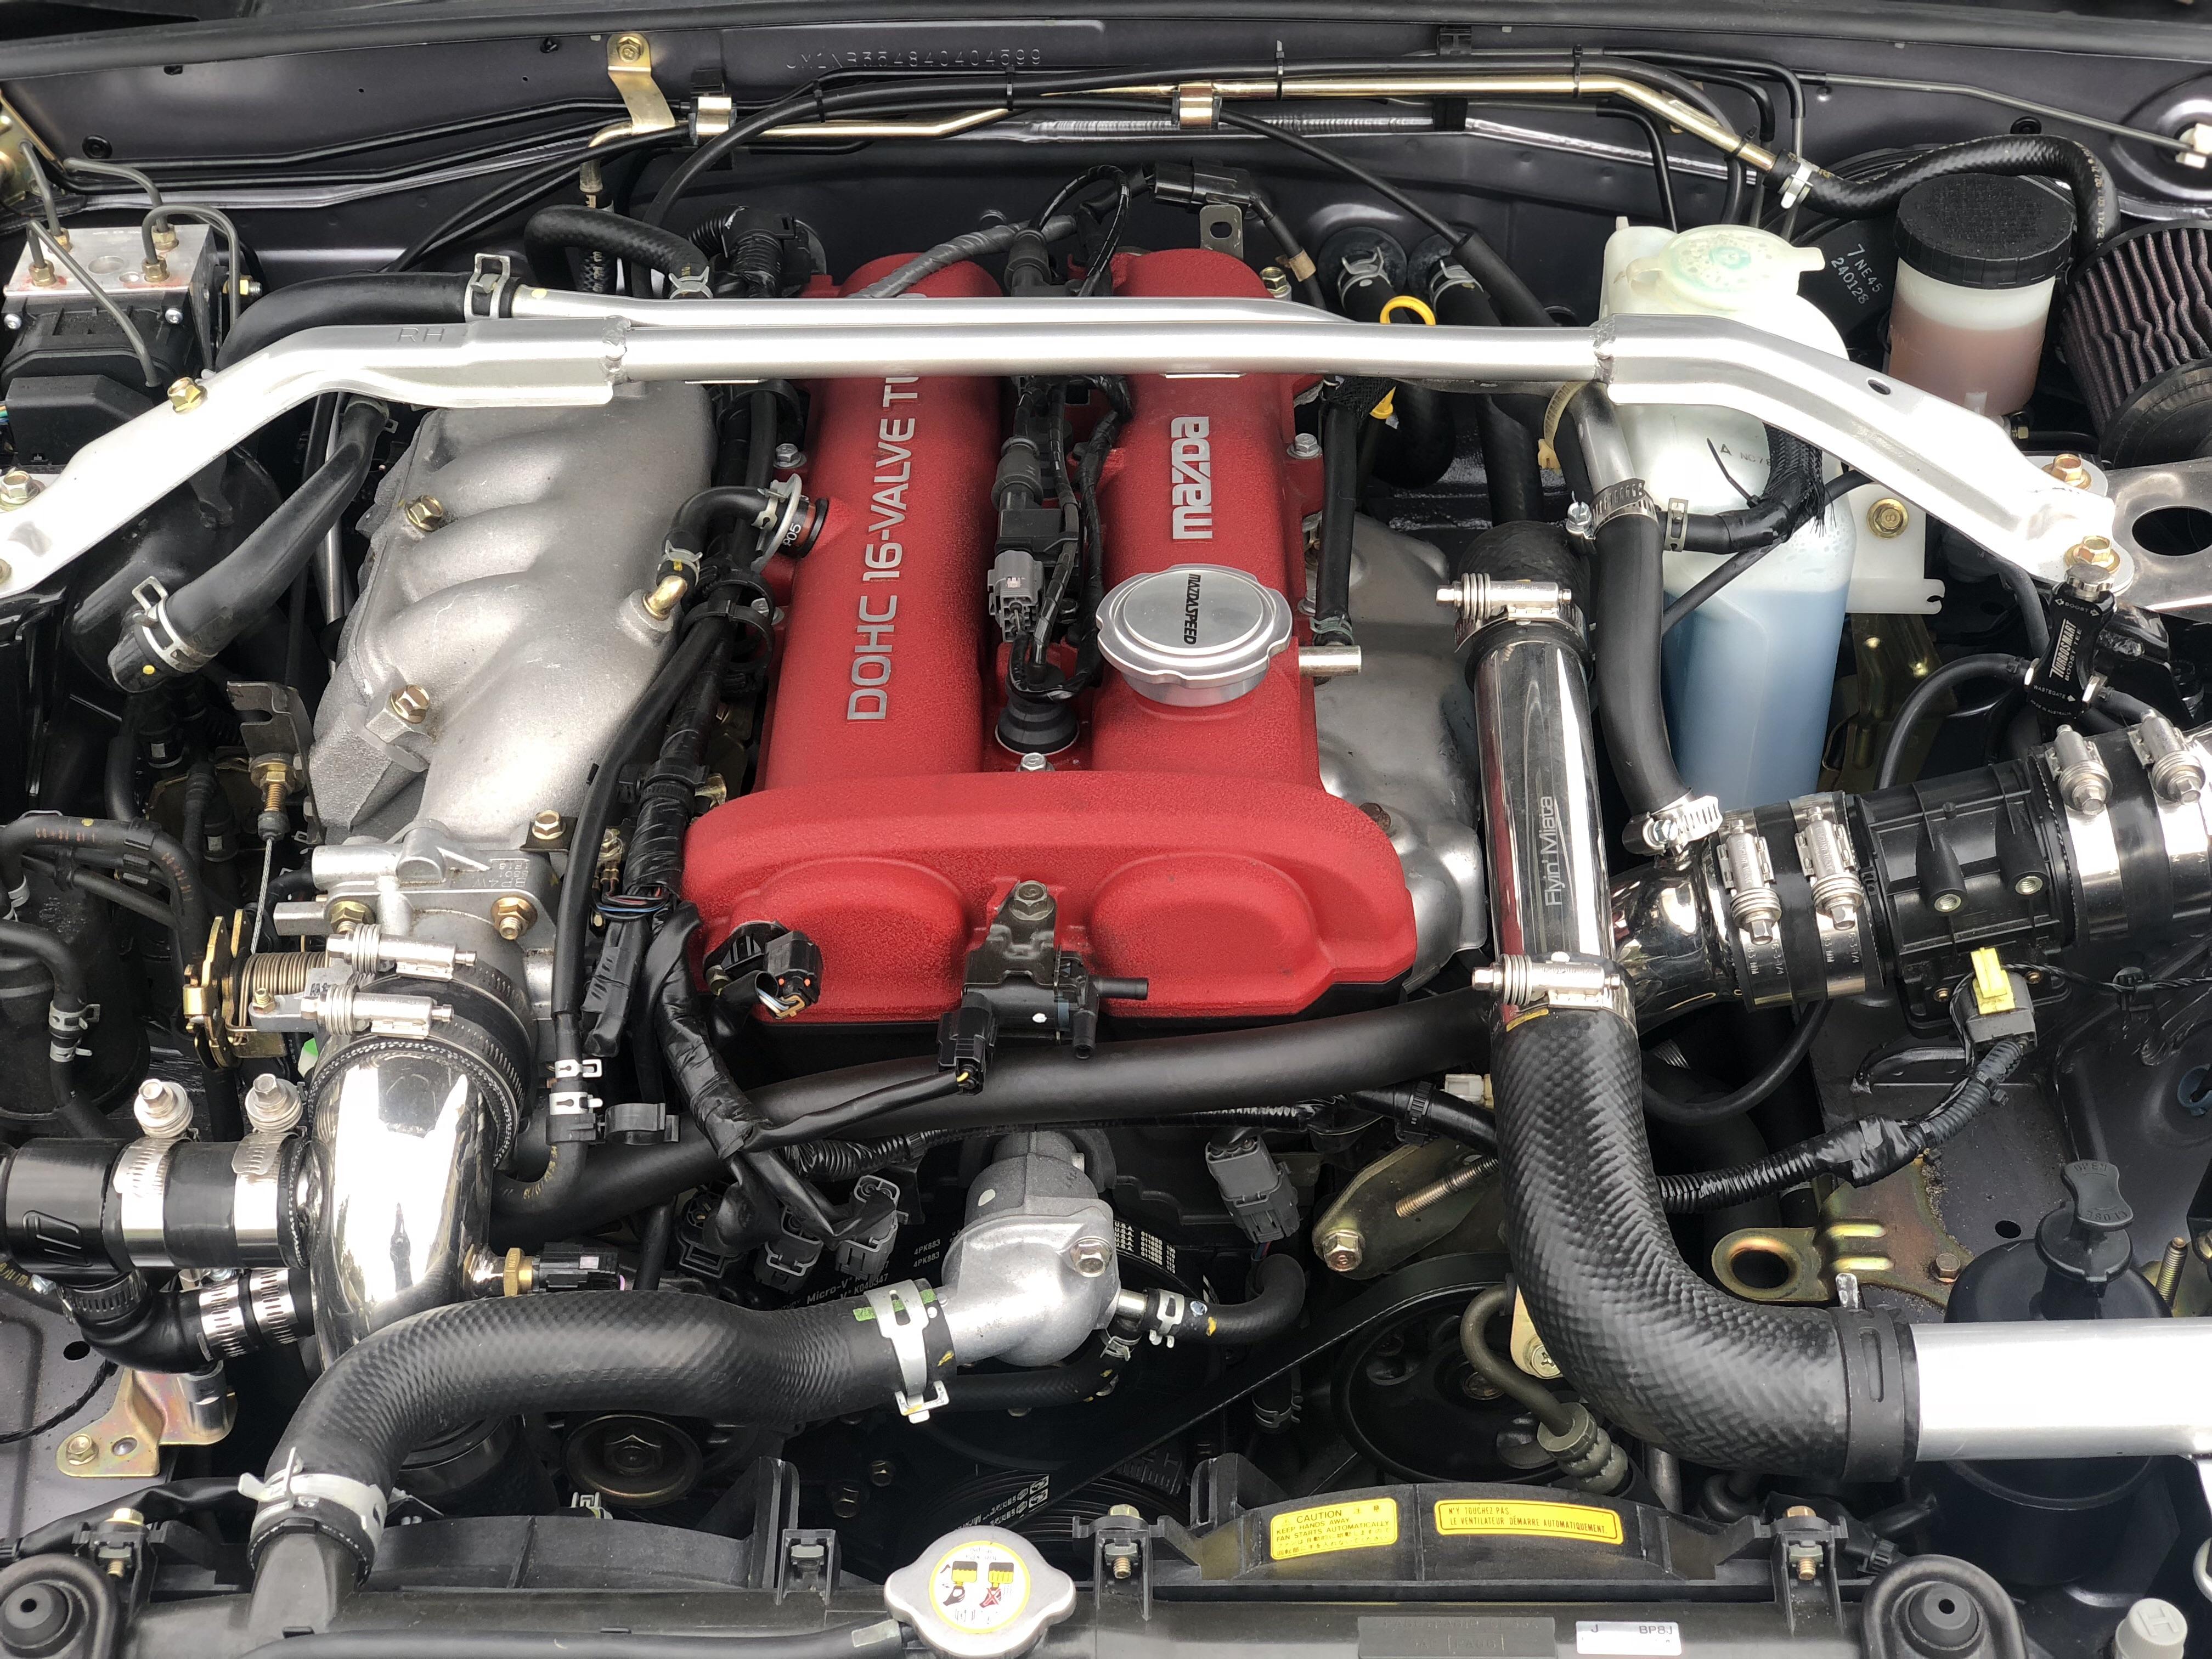 Cleaning The Engine Bay: Do’s and Don’ts